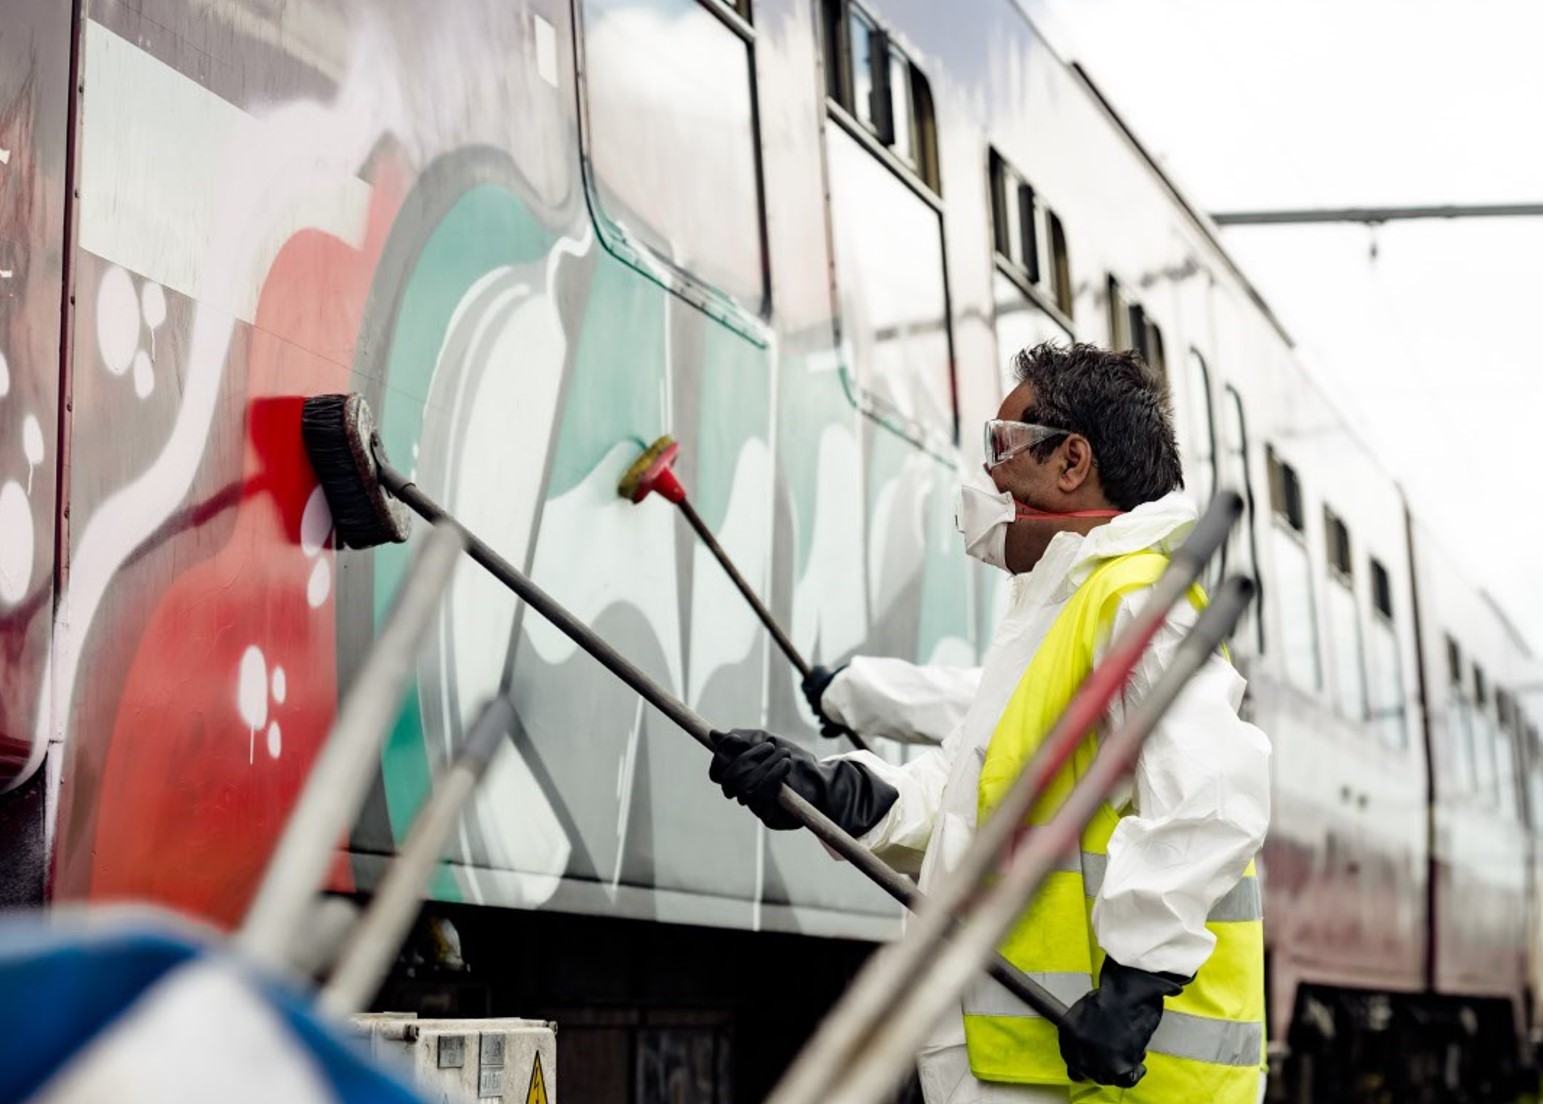 Graffiti removal is one of the specialties of Mobility Masters